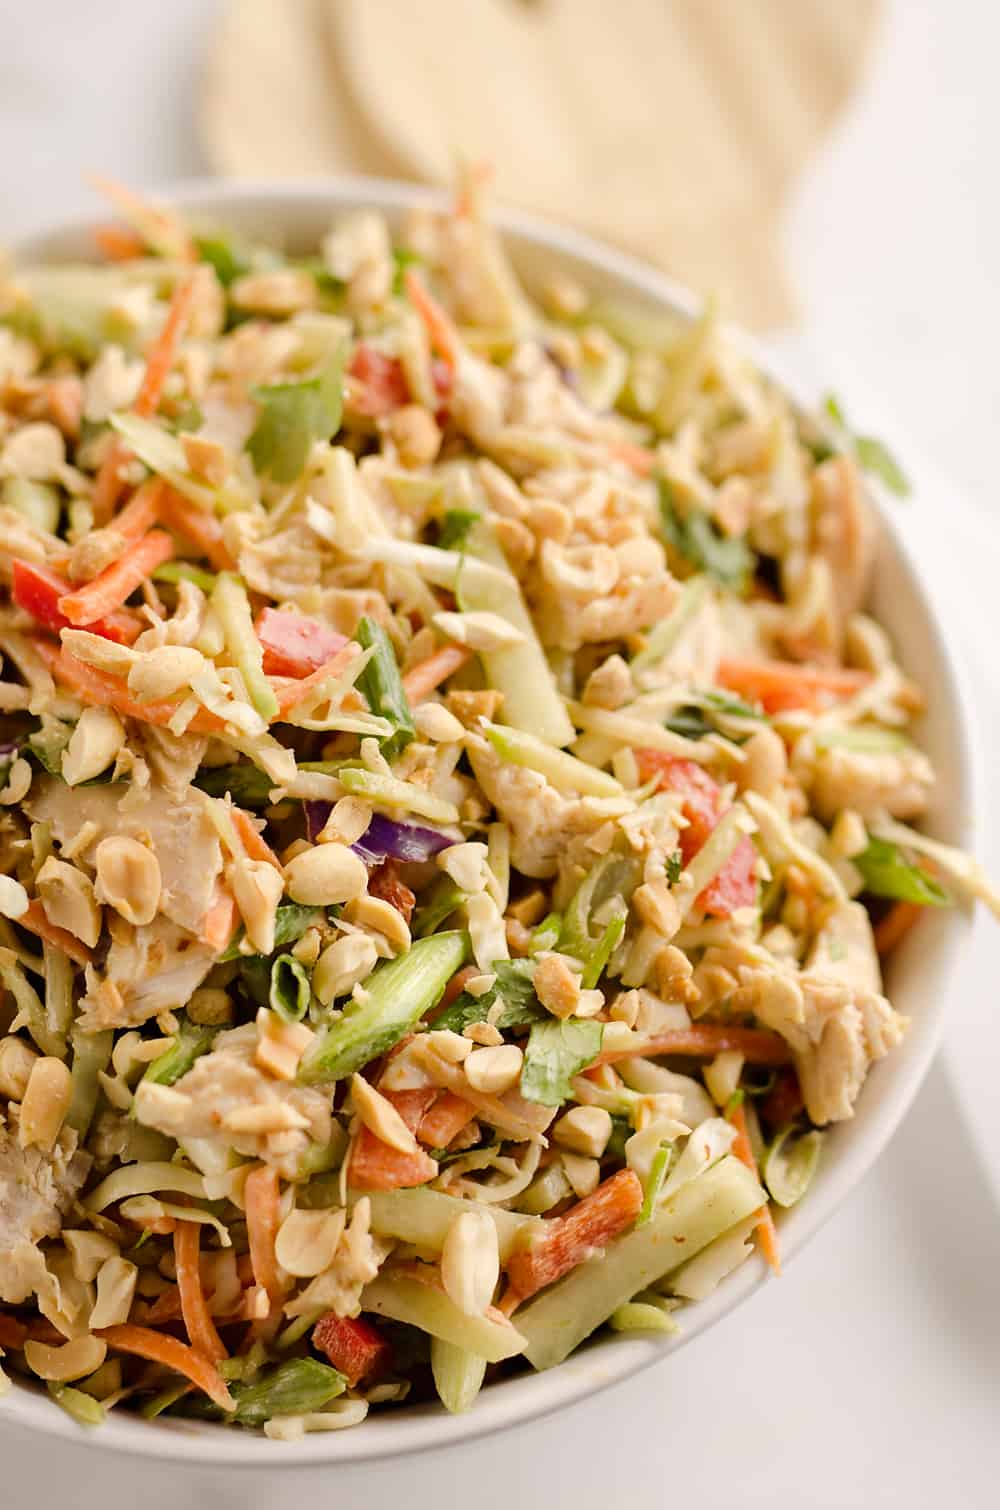 Thai Peanut Chicken Crunch Slaw Salad is an easy & healthy cold salad that is loaded with fresh flavor and crunch! Coleslaw and broccoli slaw are tossed with cucumbers, carrots, bell peppers and chicken and dressed with a homemade Thai Peanut Sauce for a hearty serving of vegetables in a salad you will love.